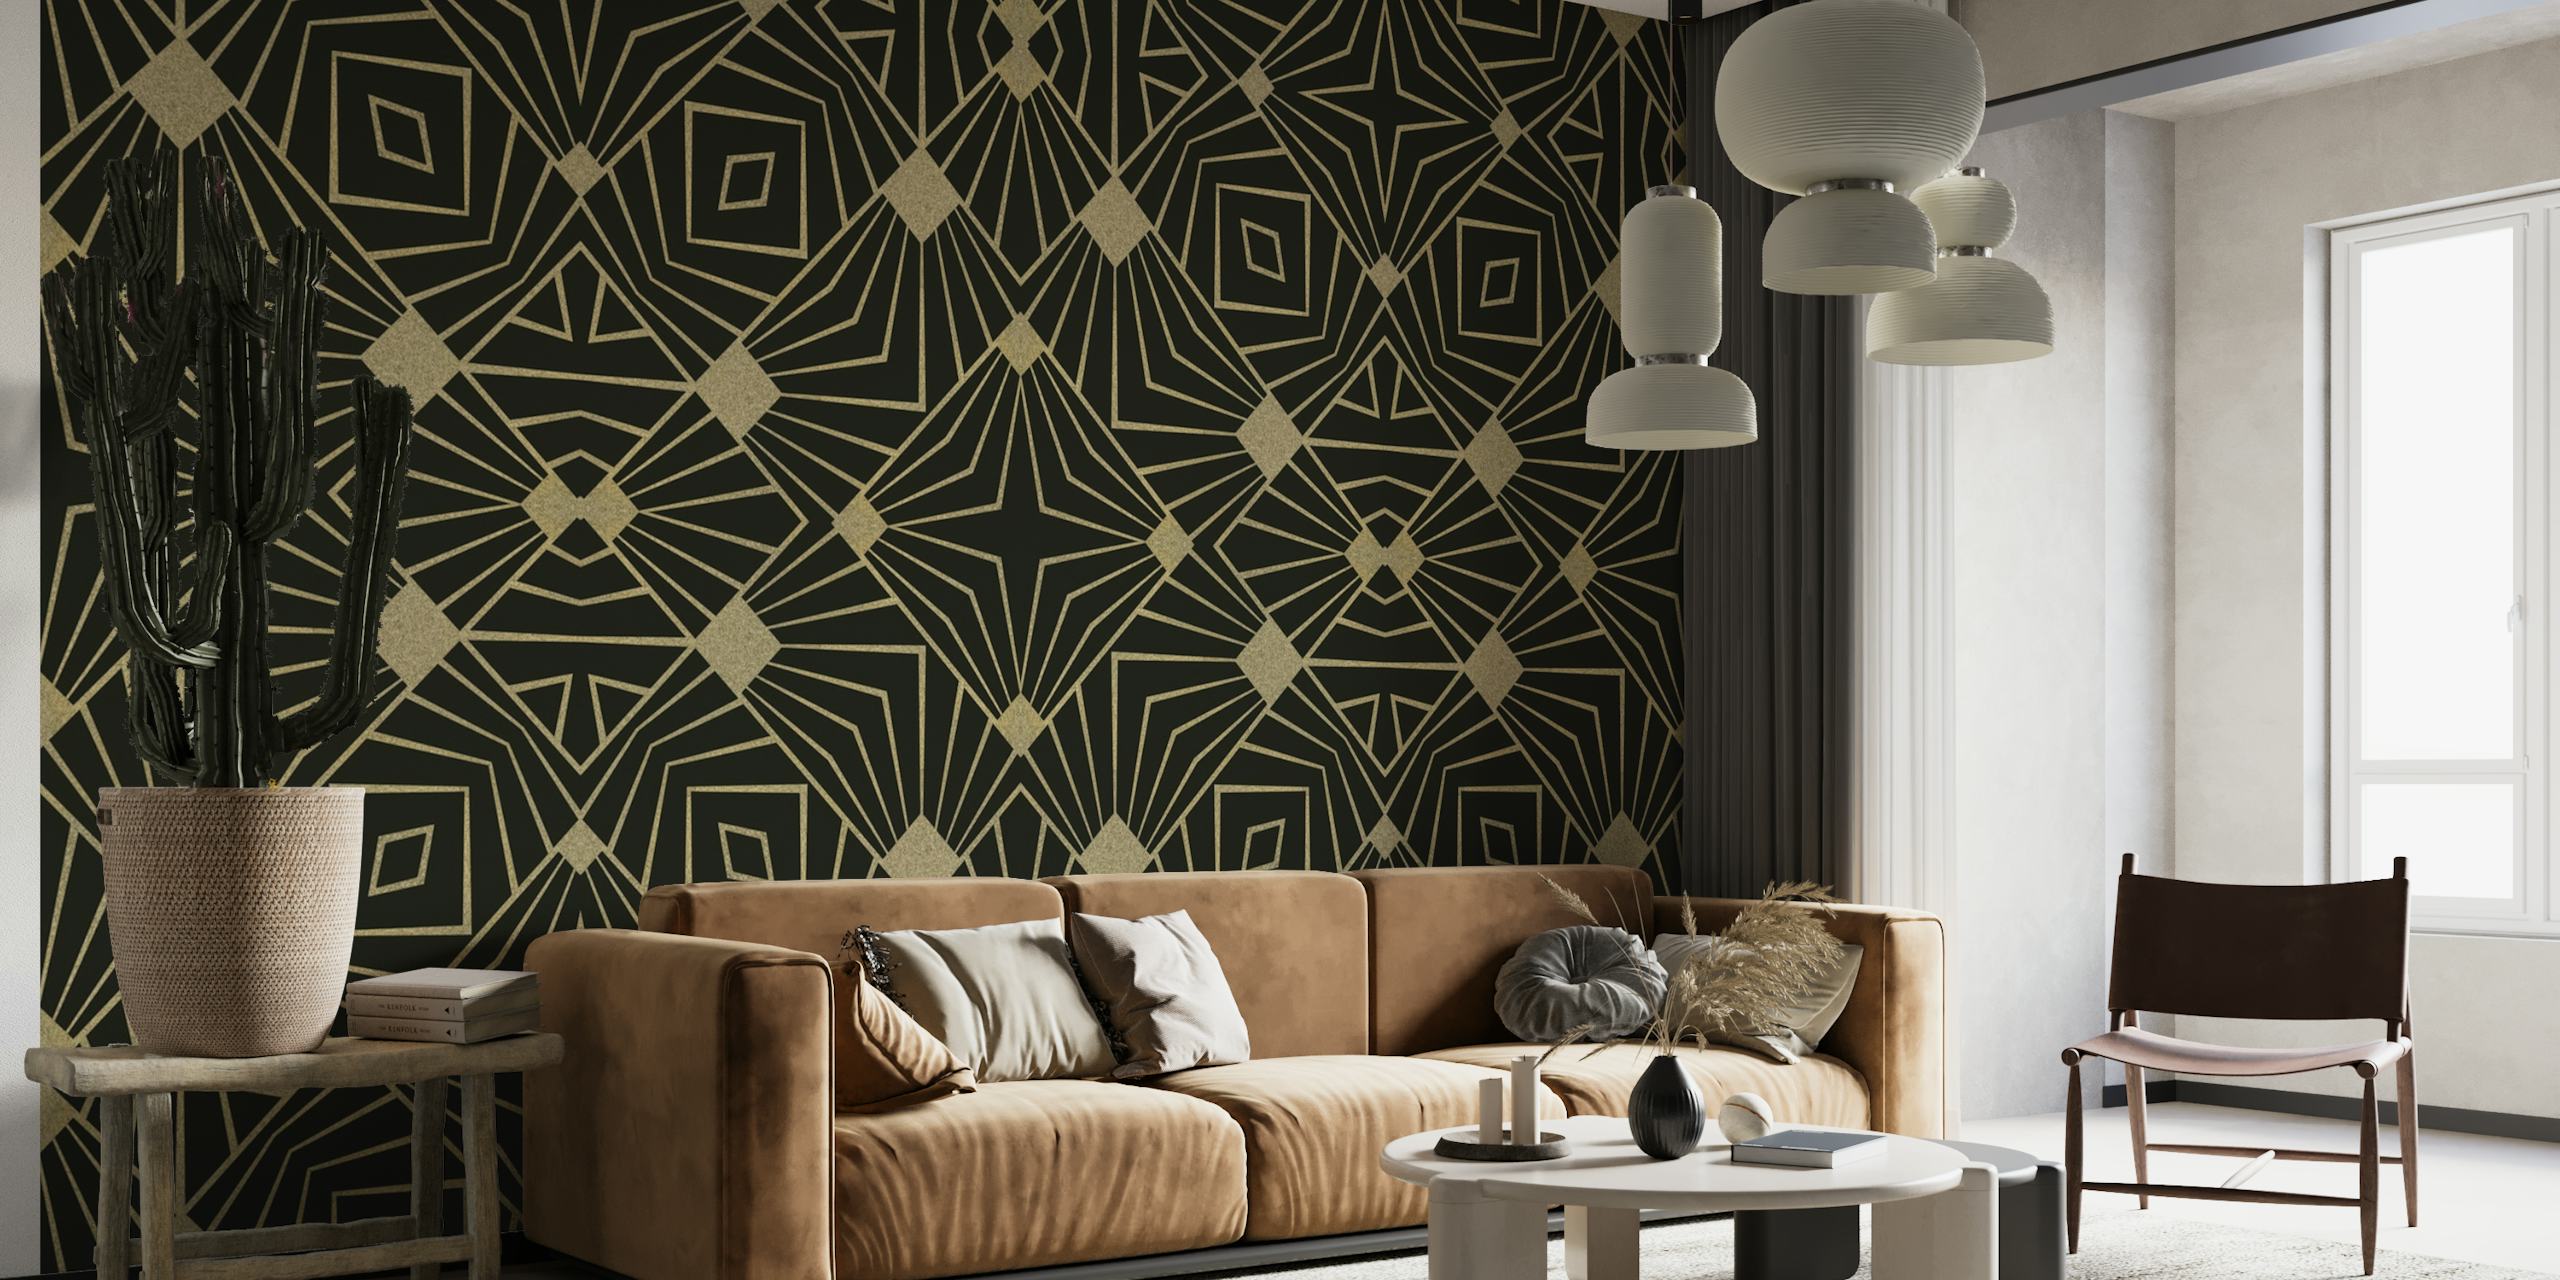 Elegant black and gold art deco pattern wallpaper displaying luxury and glamour of 192s